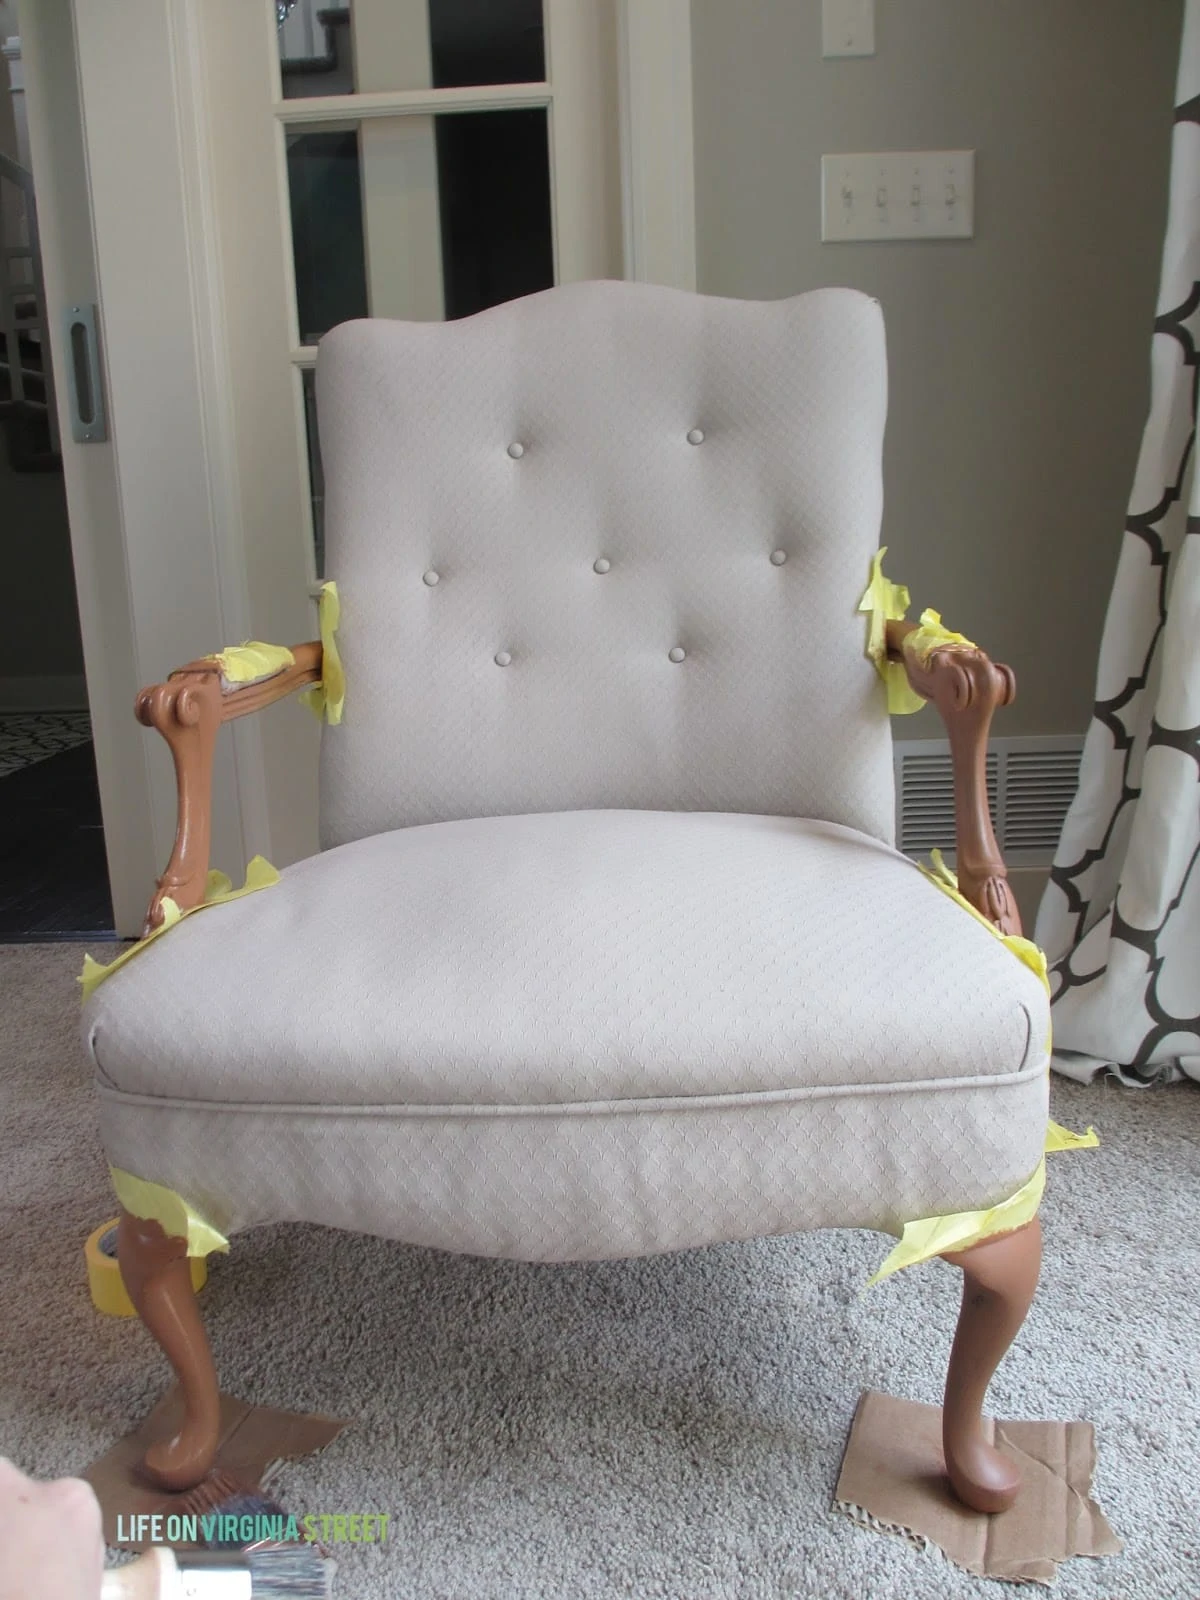 Painted Fabric and Wood Chair. I had no idea painted fabric could look this beautiful!